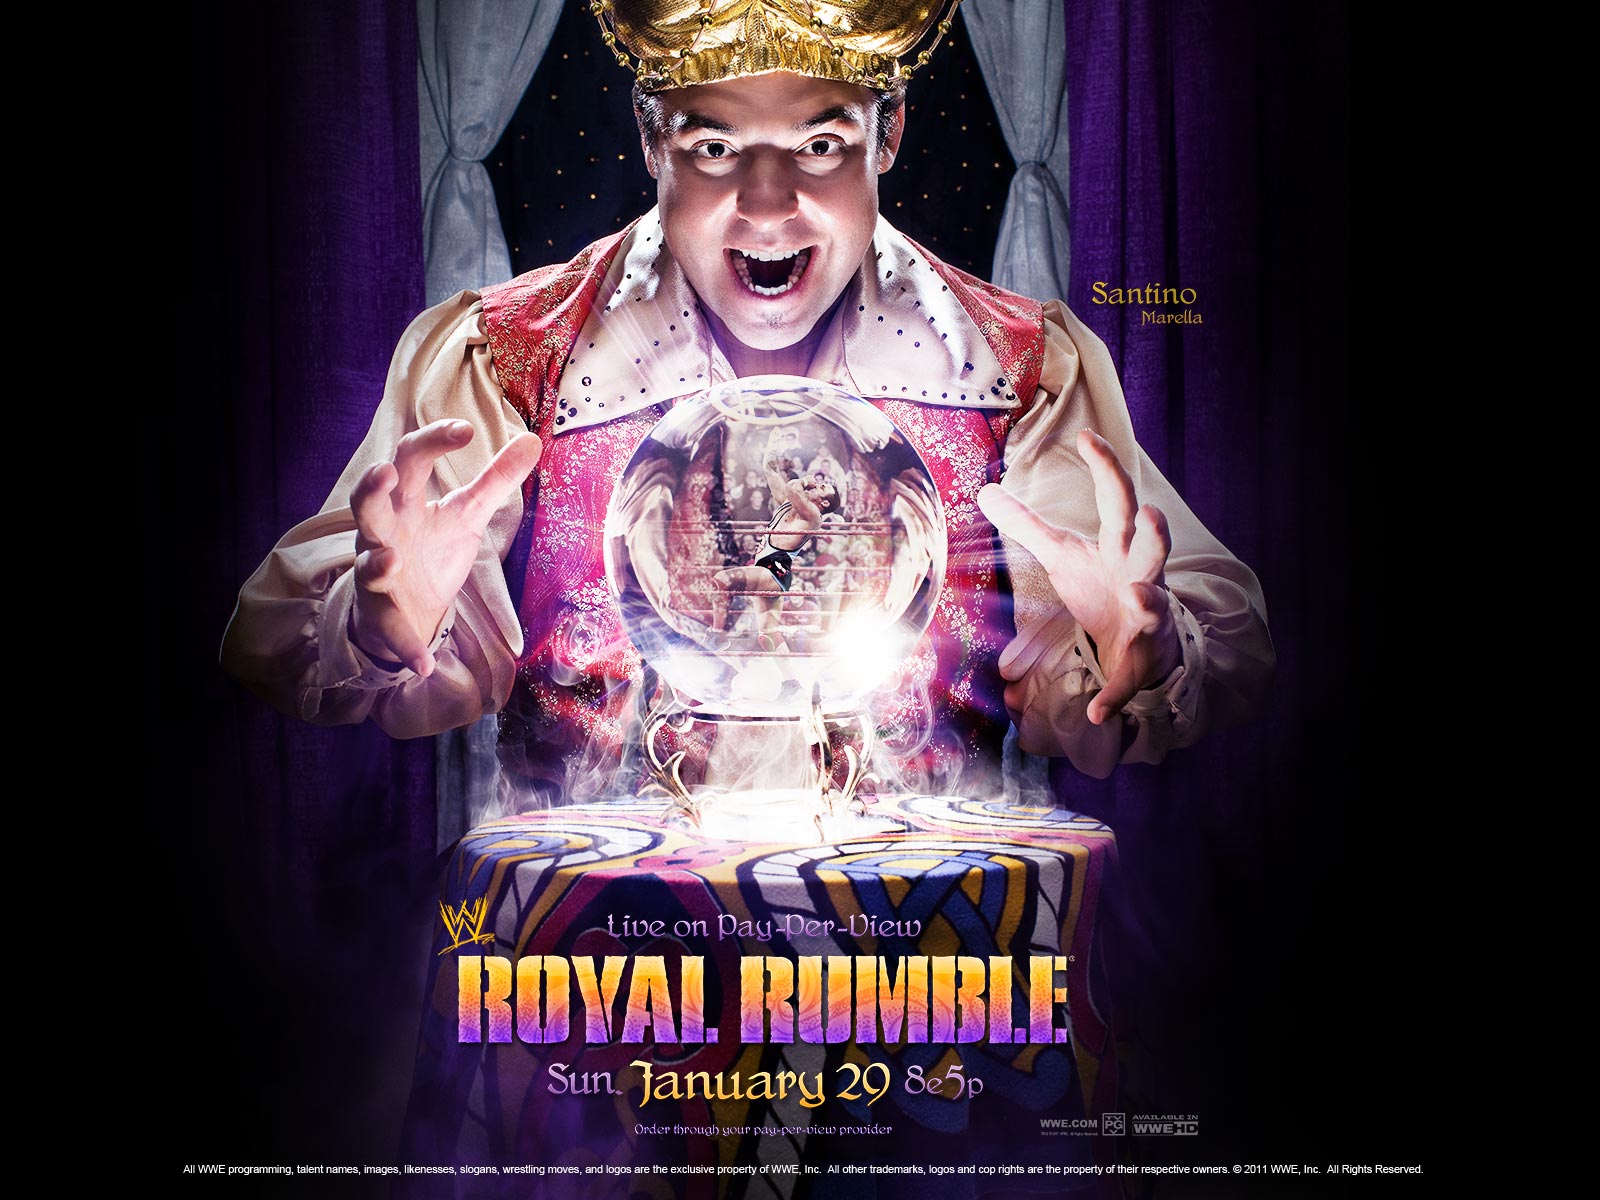 Free Download Wwe Royal Rumble Wwe Wallpaper 2248 1600x10 For Your Desktop Mobile Tablet Explore 95 Wwe Royal Rumble Wallpapers Wwe Royal Rumble Wallpapers Wwe Women S Royal Rumble Logo Wallpapers Royal Wallpaper